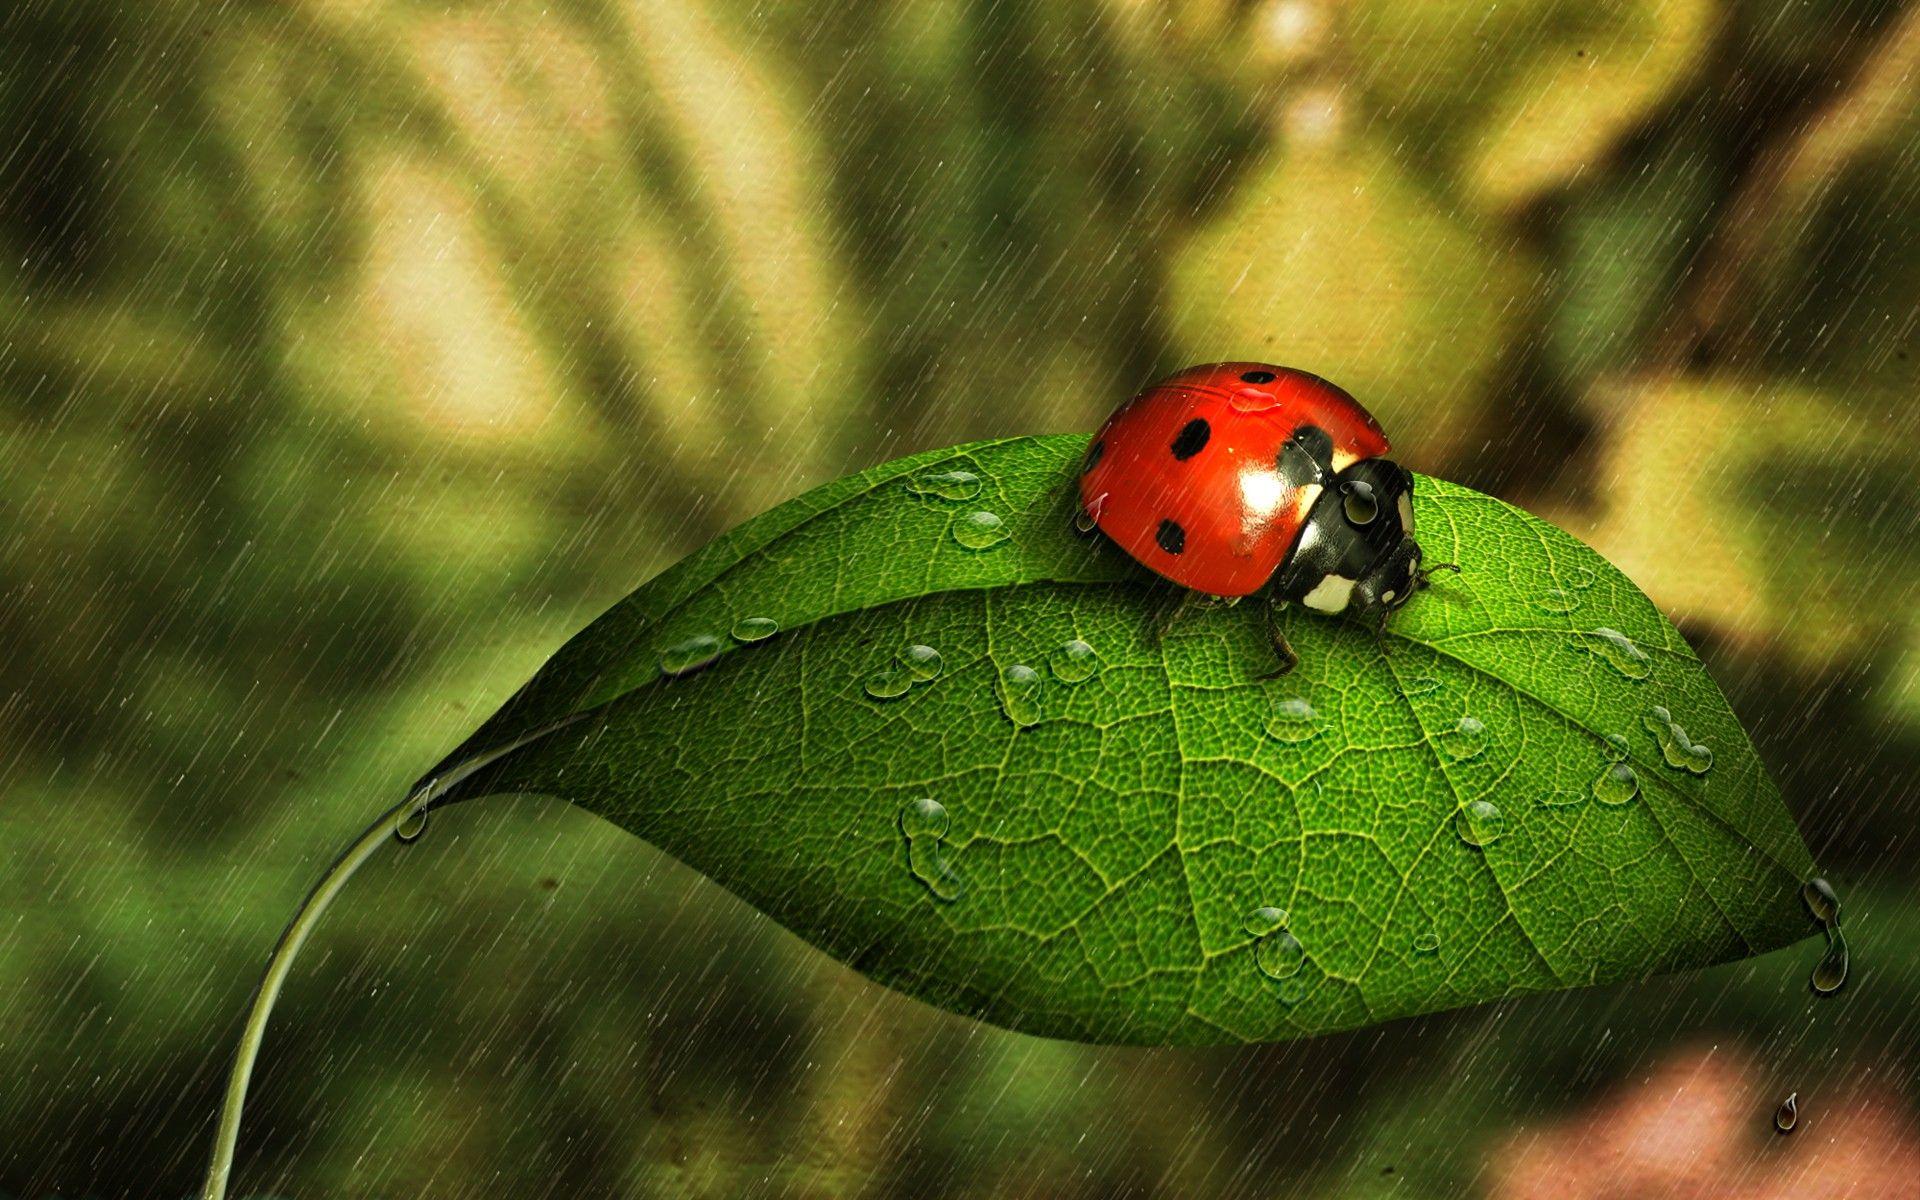 Cute Cartoon Red Ladybug Wallpaper Background Design. Stock Photo, Picture  and Royalty Free Image. Image 4040901.